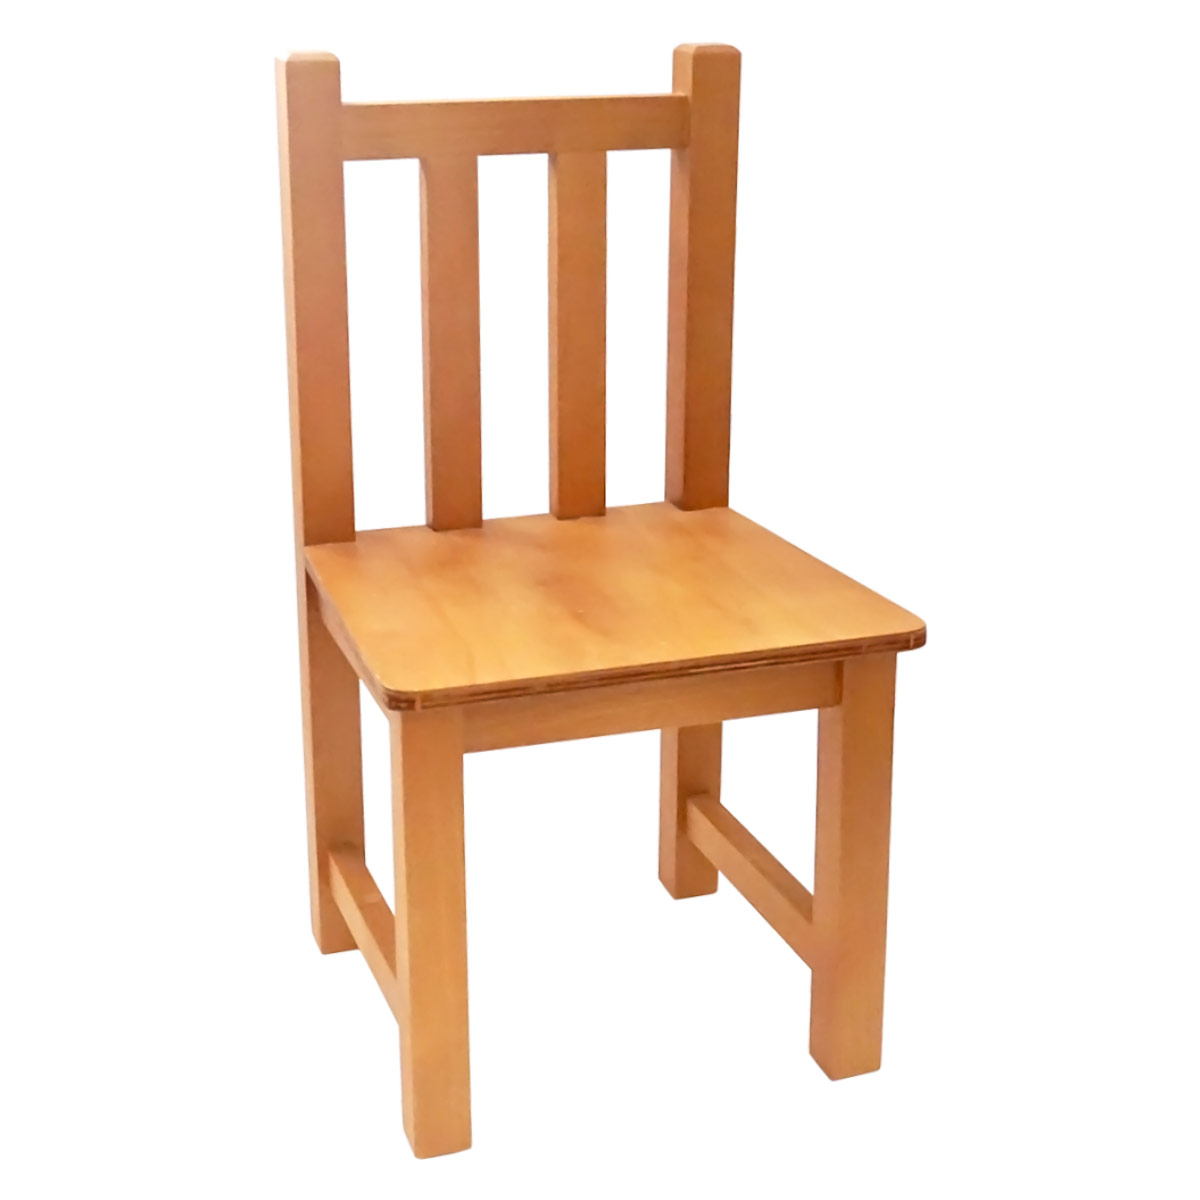 https://kidoenterprises.com/wp-content/uploads/2018/04/Small-Chair-Polished-without-Arms.jpg